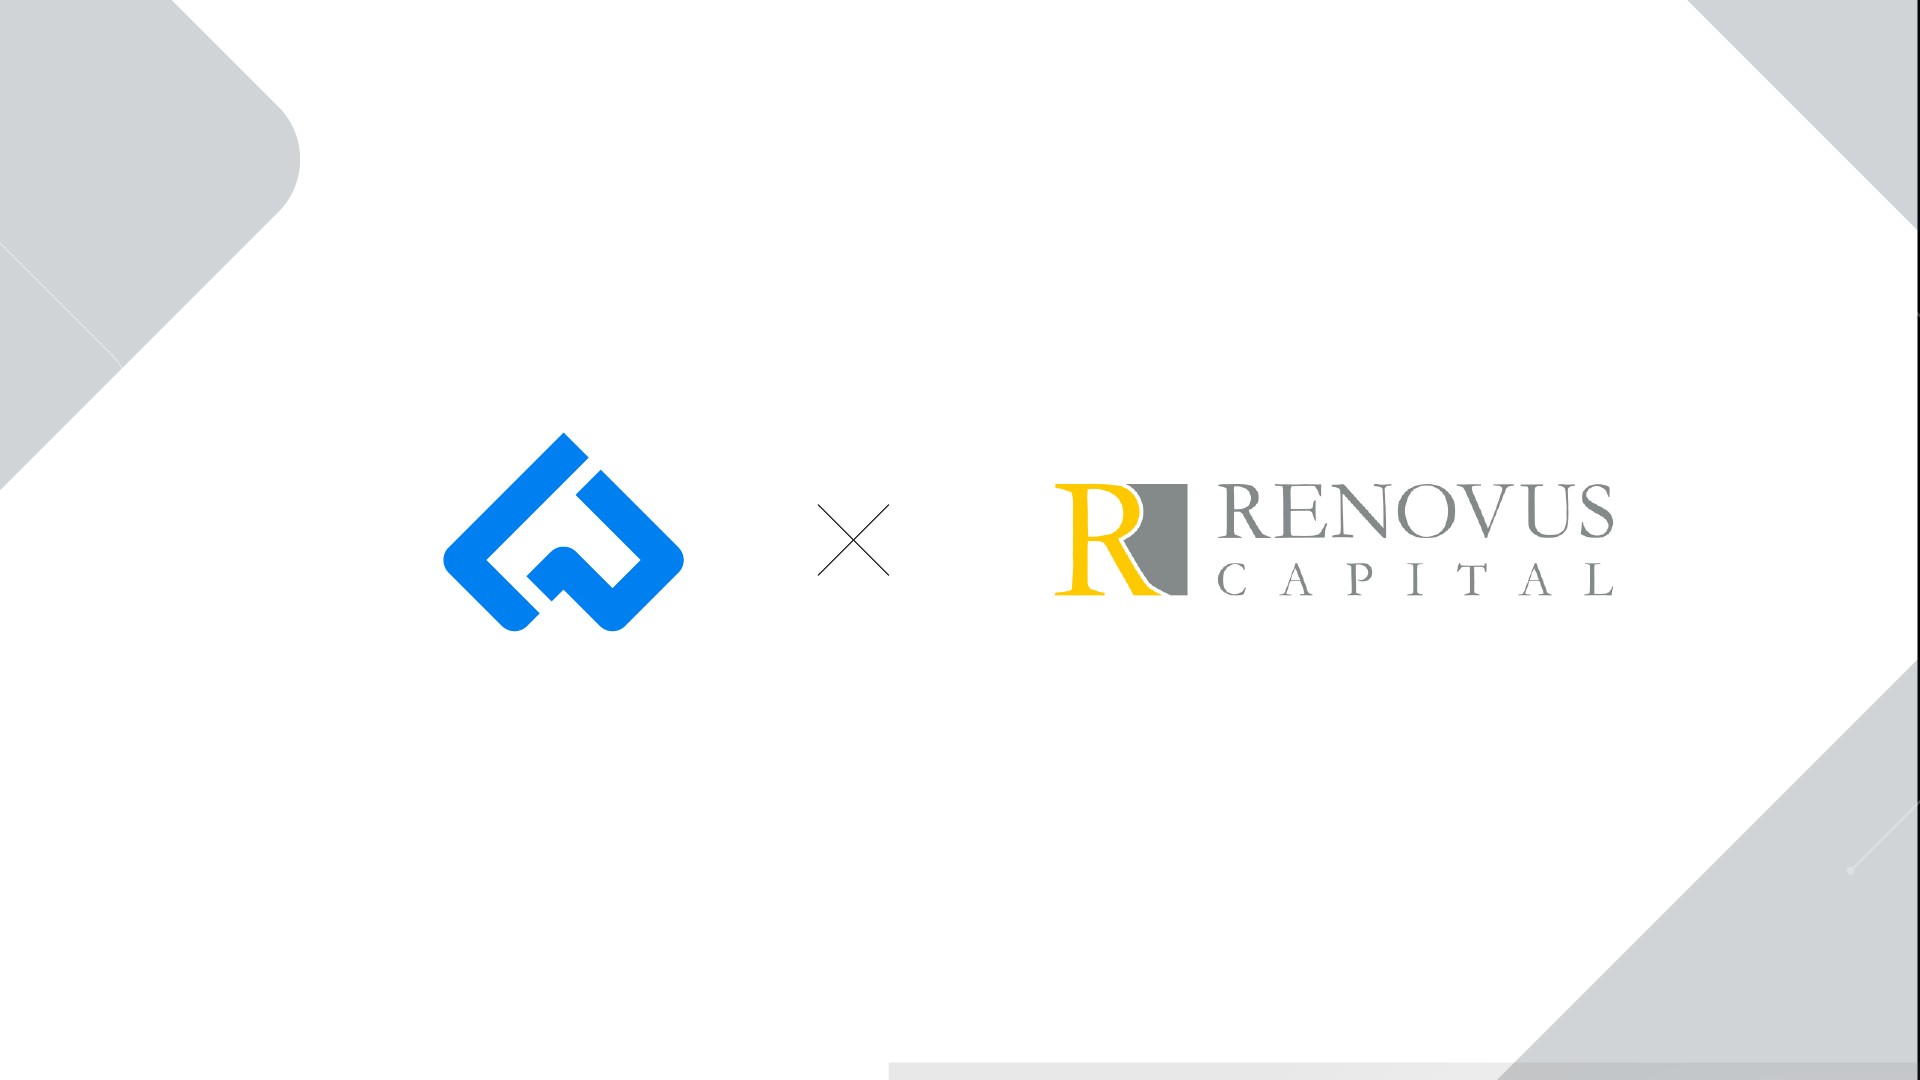 LeapPoint and Renovus Capital Logos